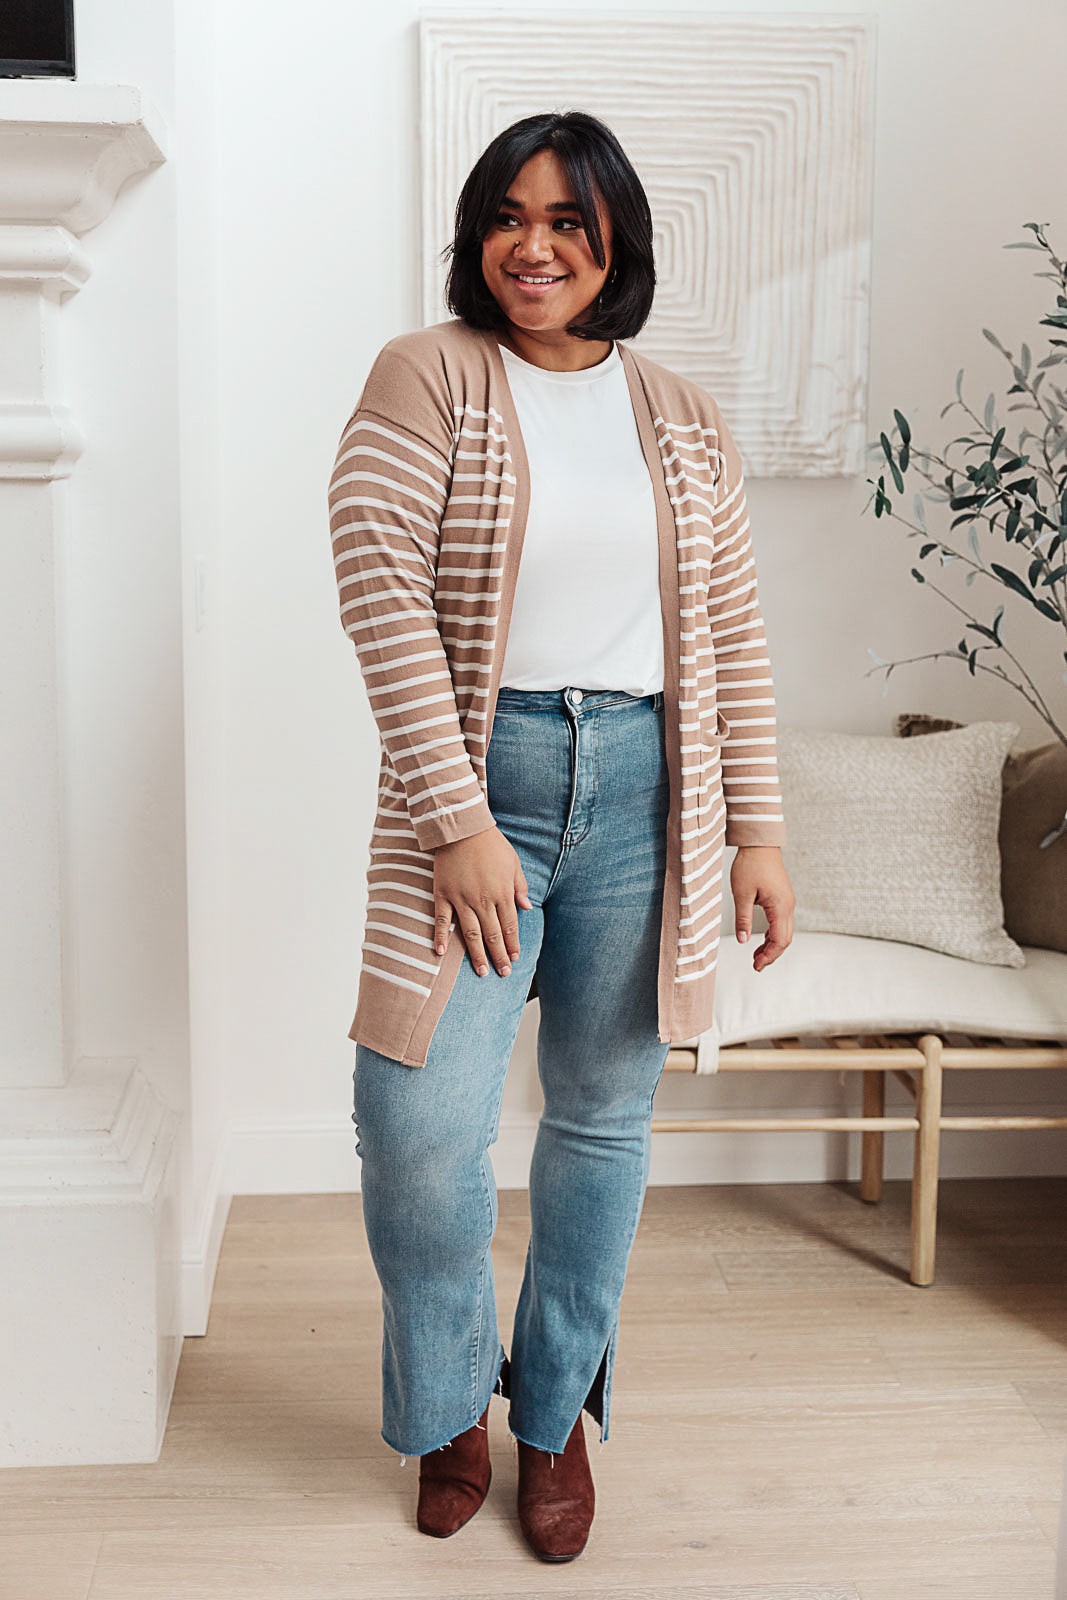 Taking it Easy Striped Cardigan In Taupe   